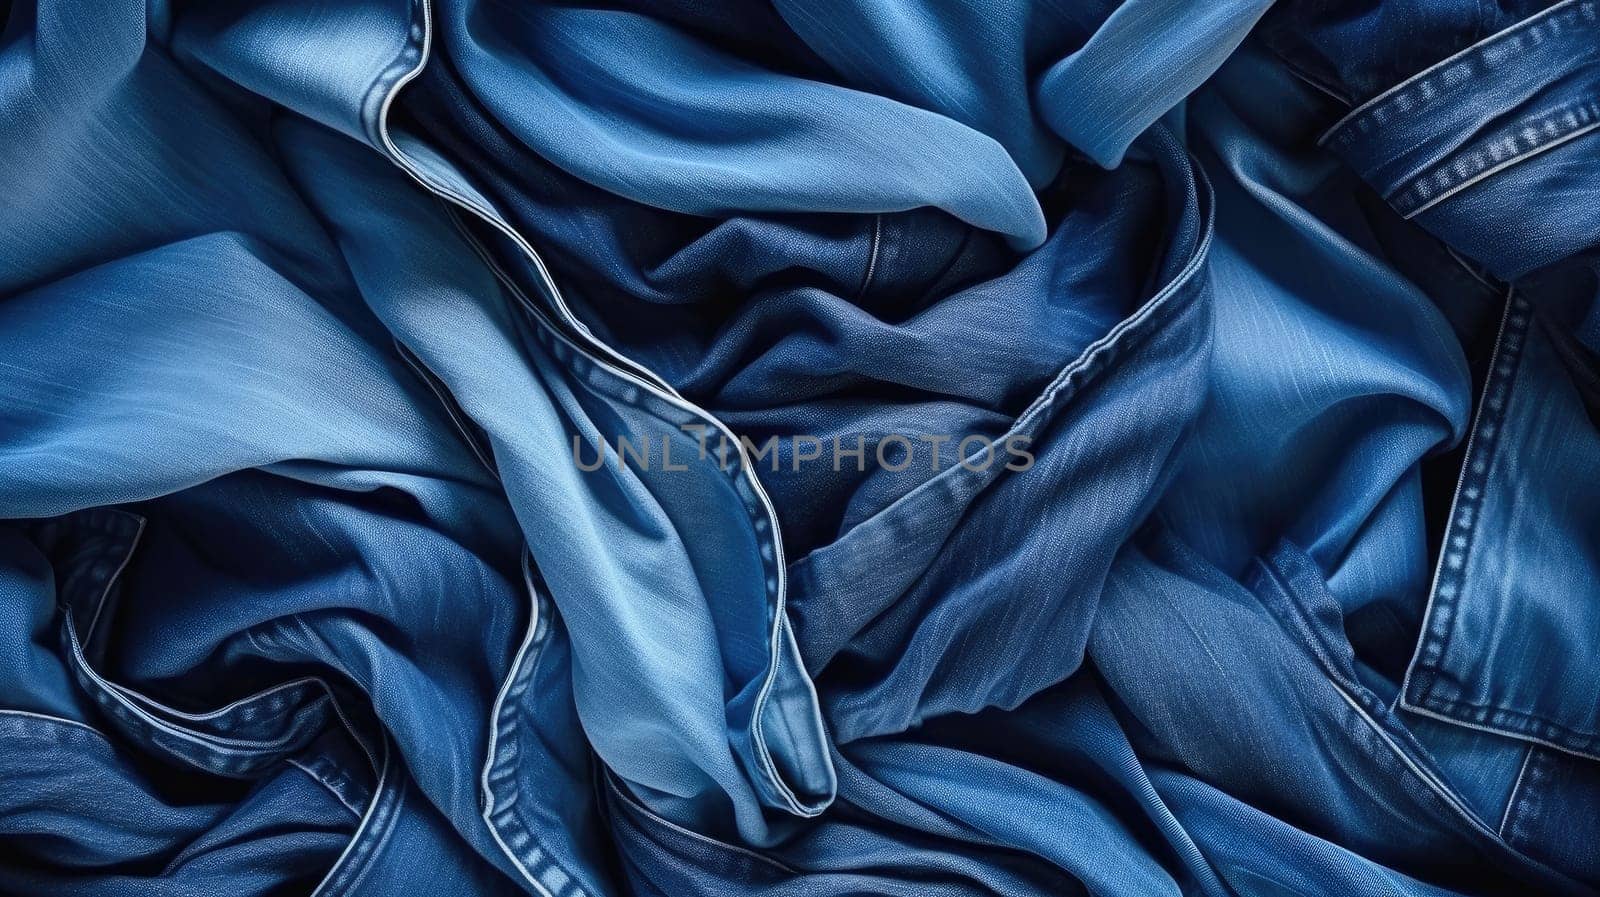 Denim background. Variety of crumpled blue jeans. Top view to stack of jeans denim. Top View Stack of Crumpled Blue Jeans, Assorted Denim Background. Clothing Variety and Textured Folded Denim Display by ViShark